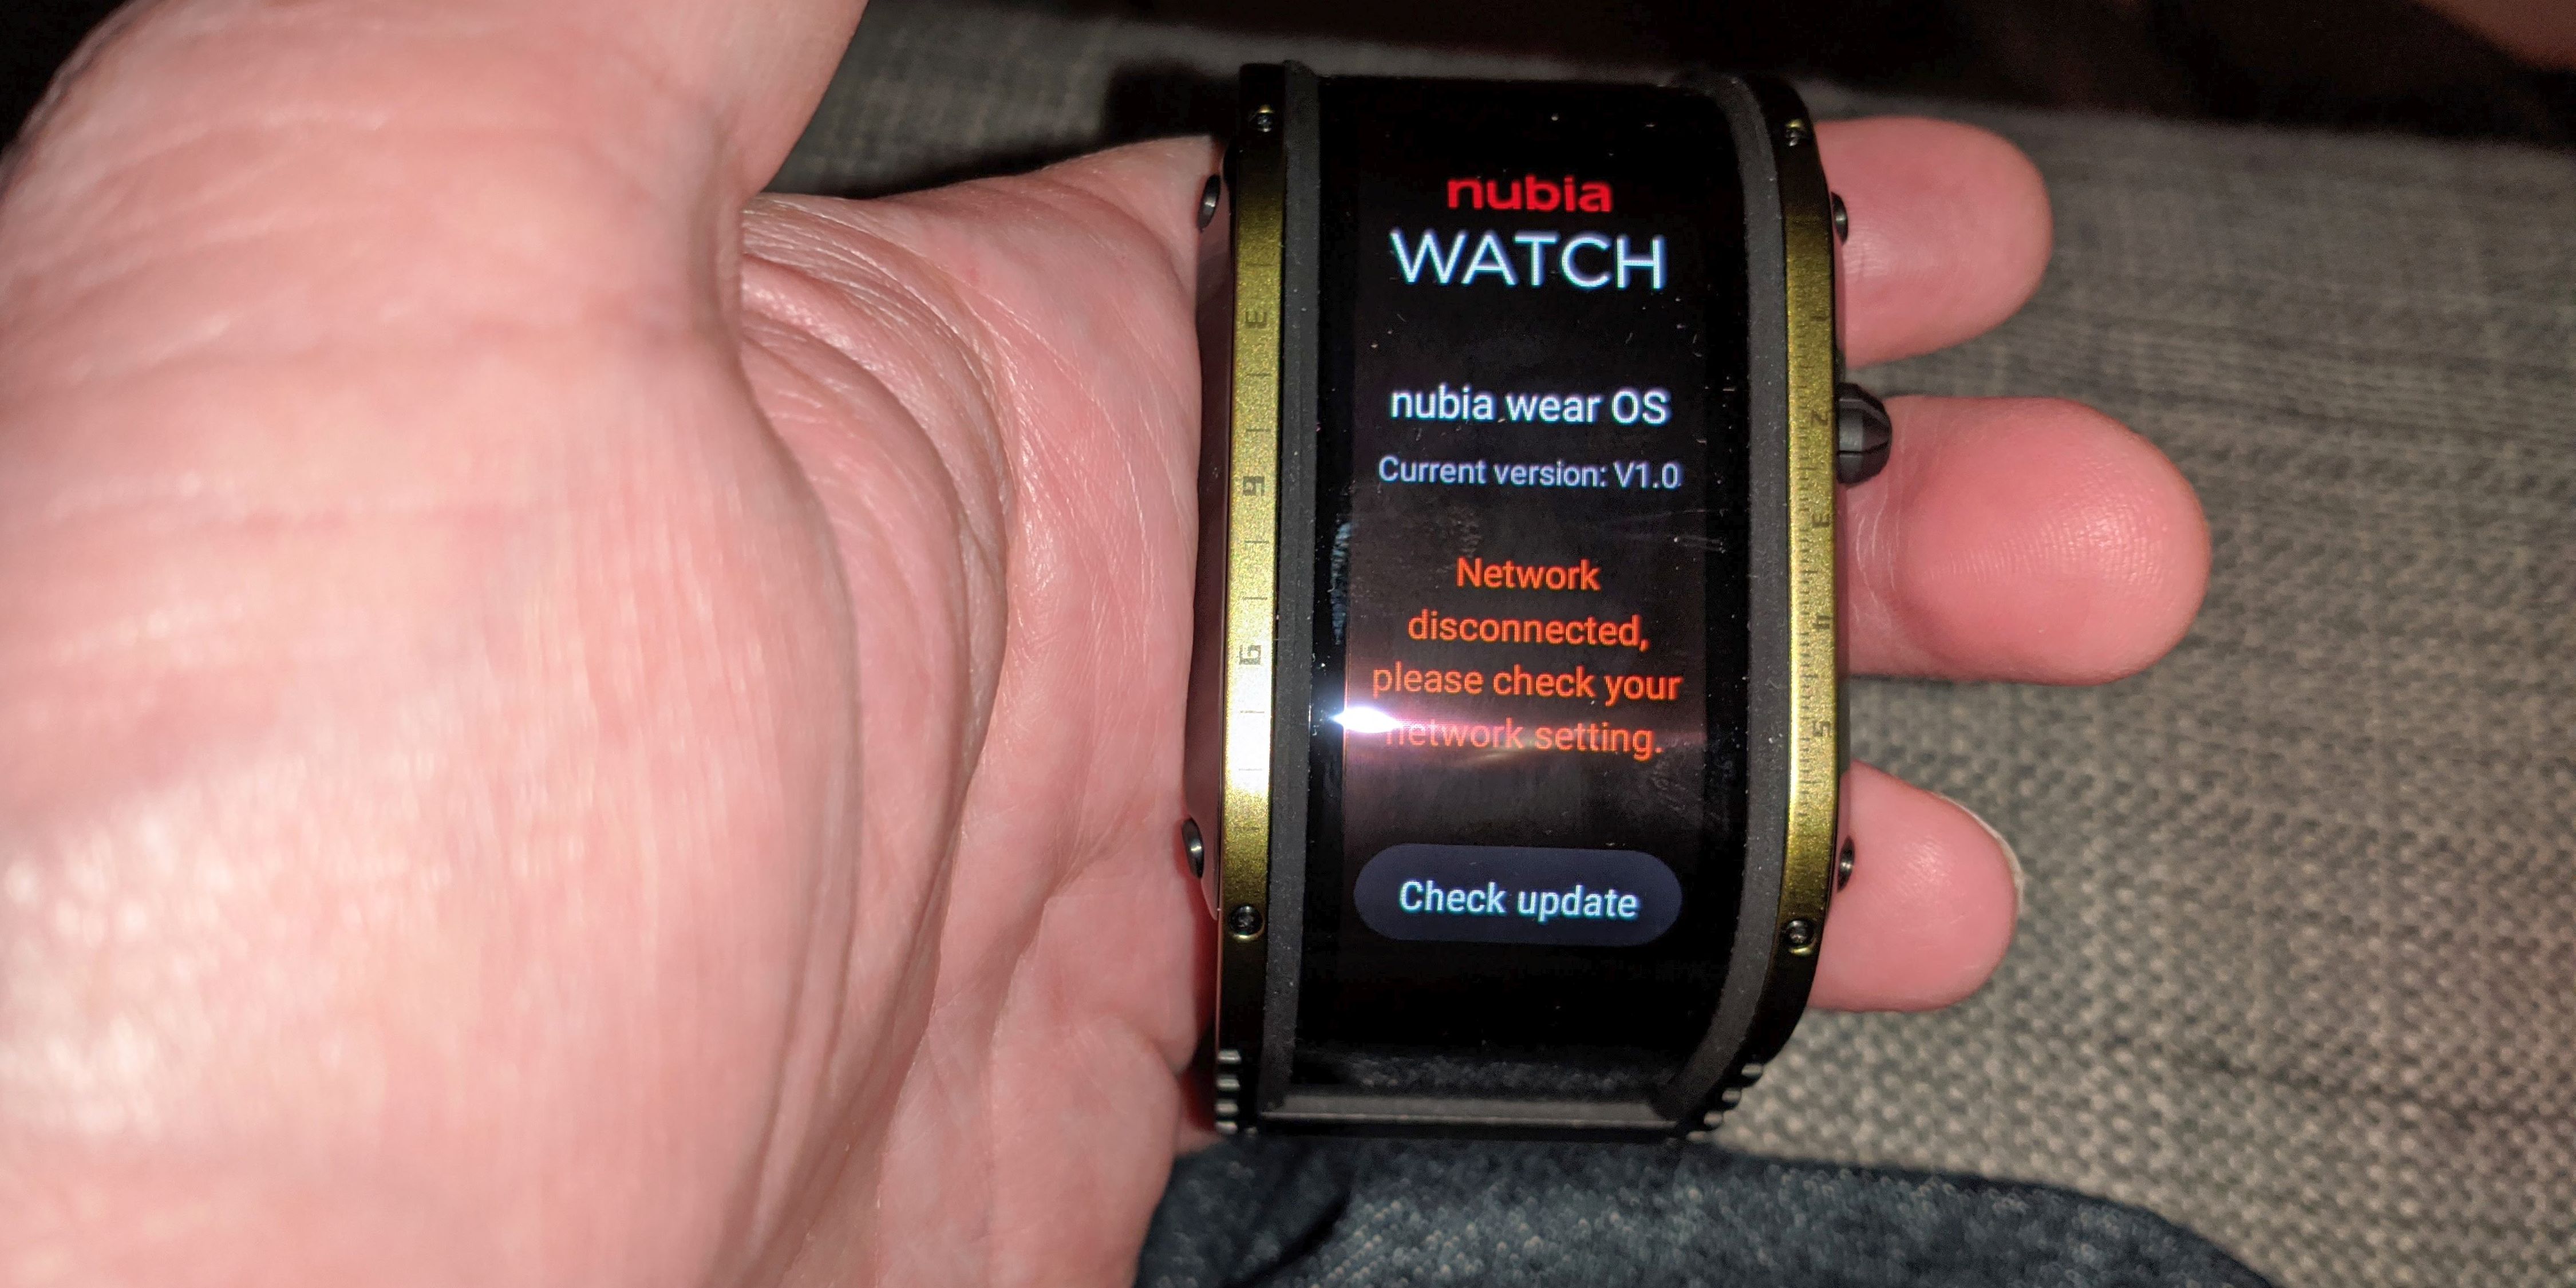 nubia watch network disconnected